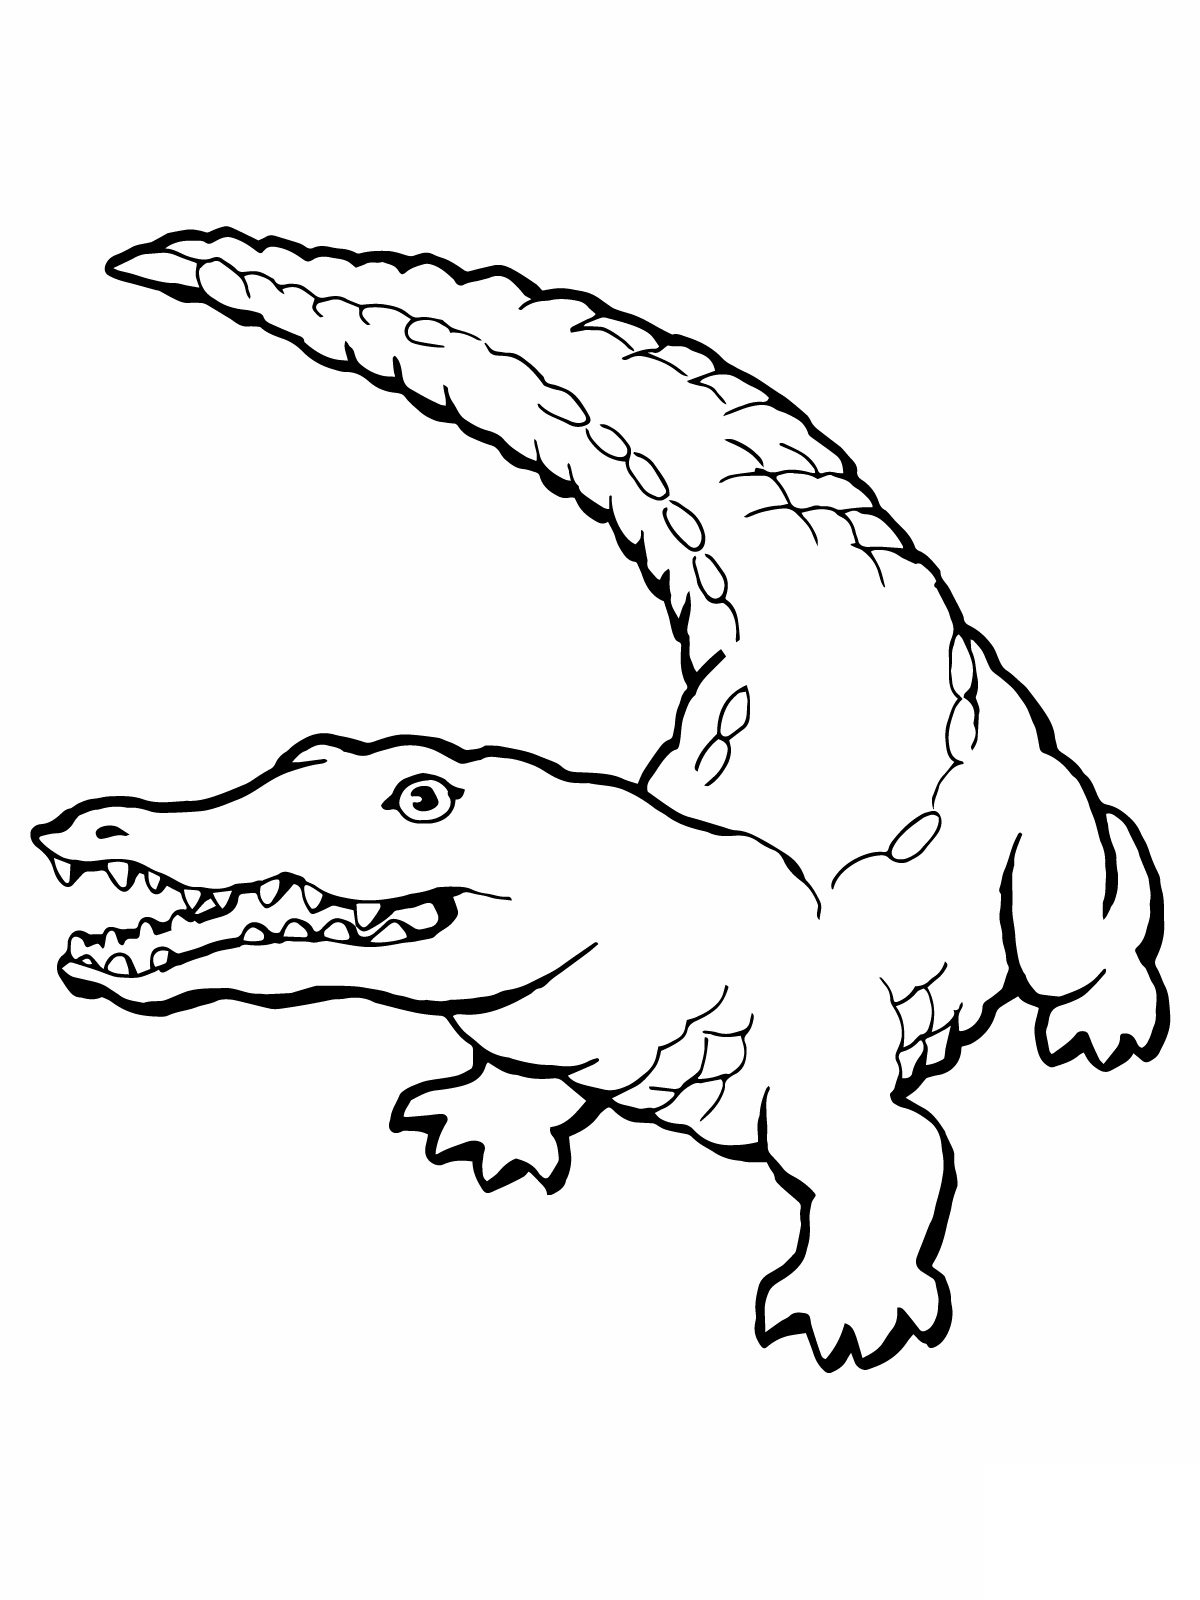 Coloring Page Alligator Alligator Clipart Coloring Page Jpg Clipartpost